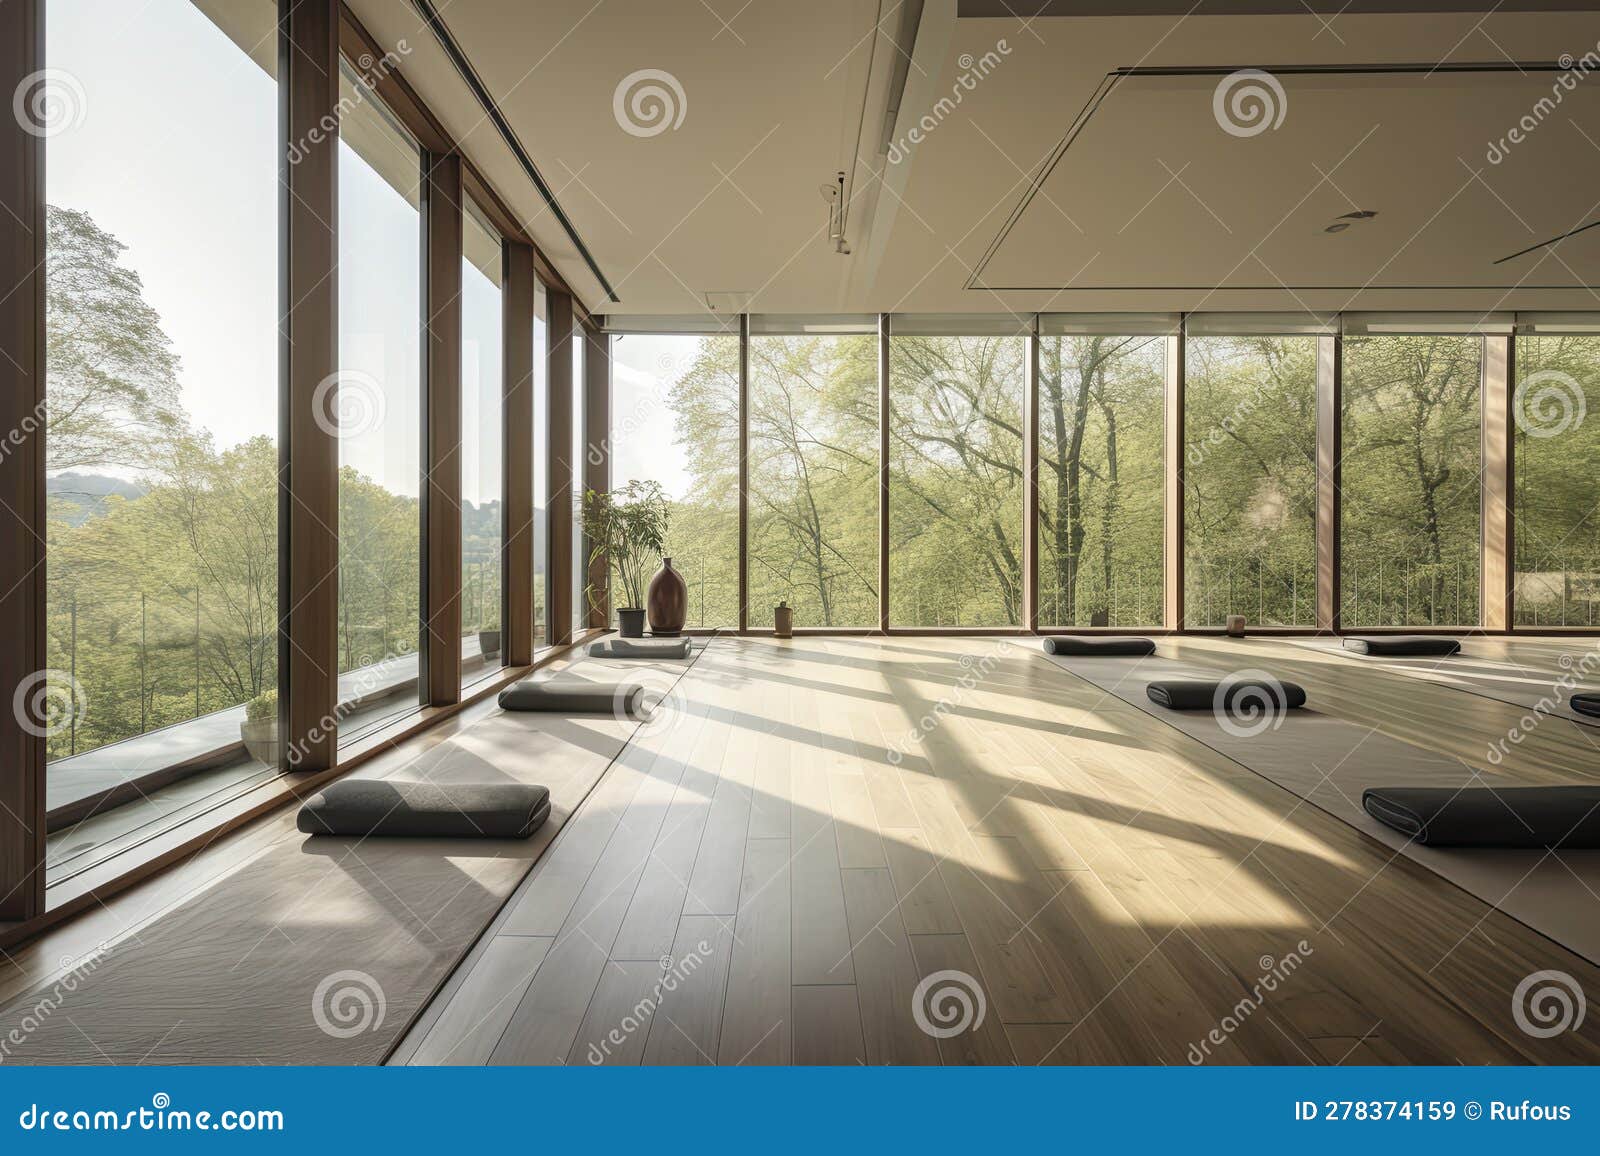 Clean and Calm Yoga Studio with a Beautiful Nature View. Interior Design  Stock Illustration - Illustration of luxury, calm: 278374159